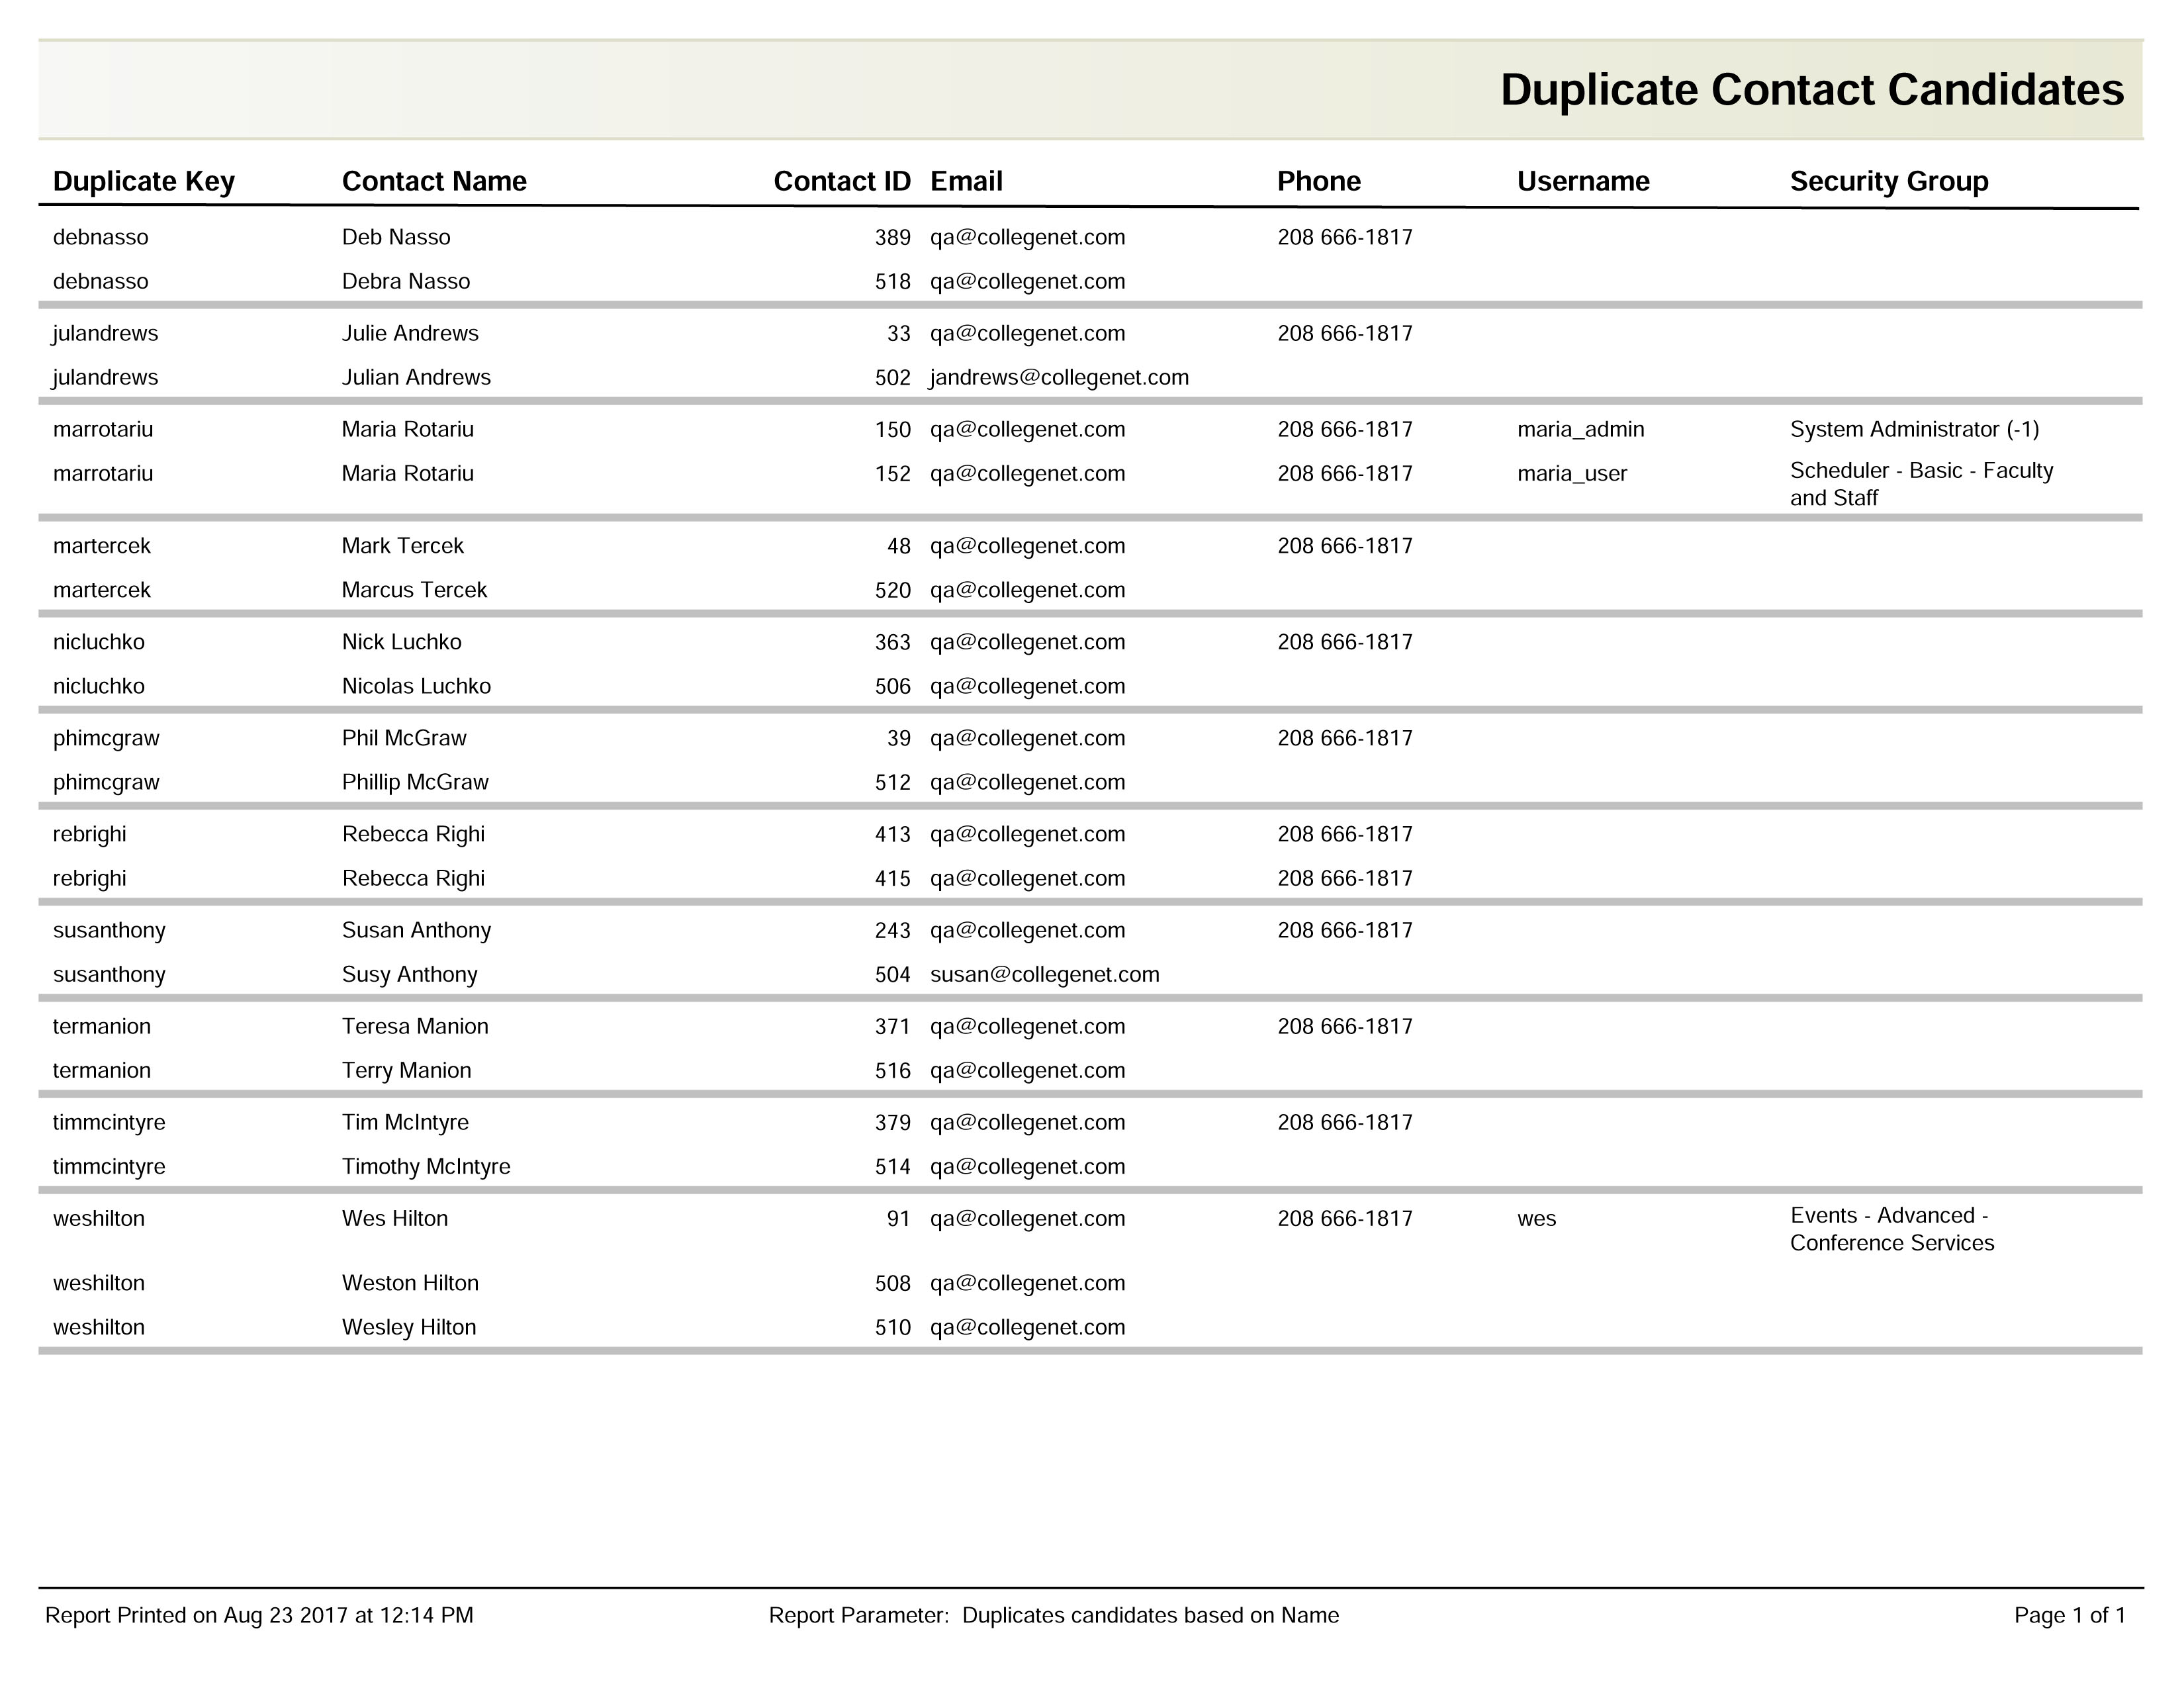 Duplicate contact candidates example